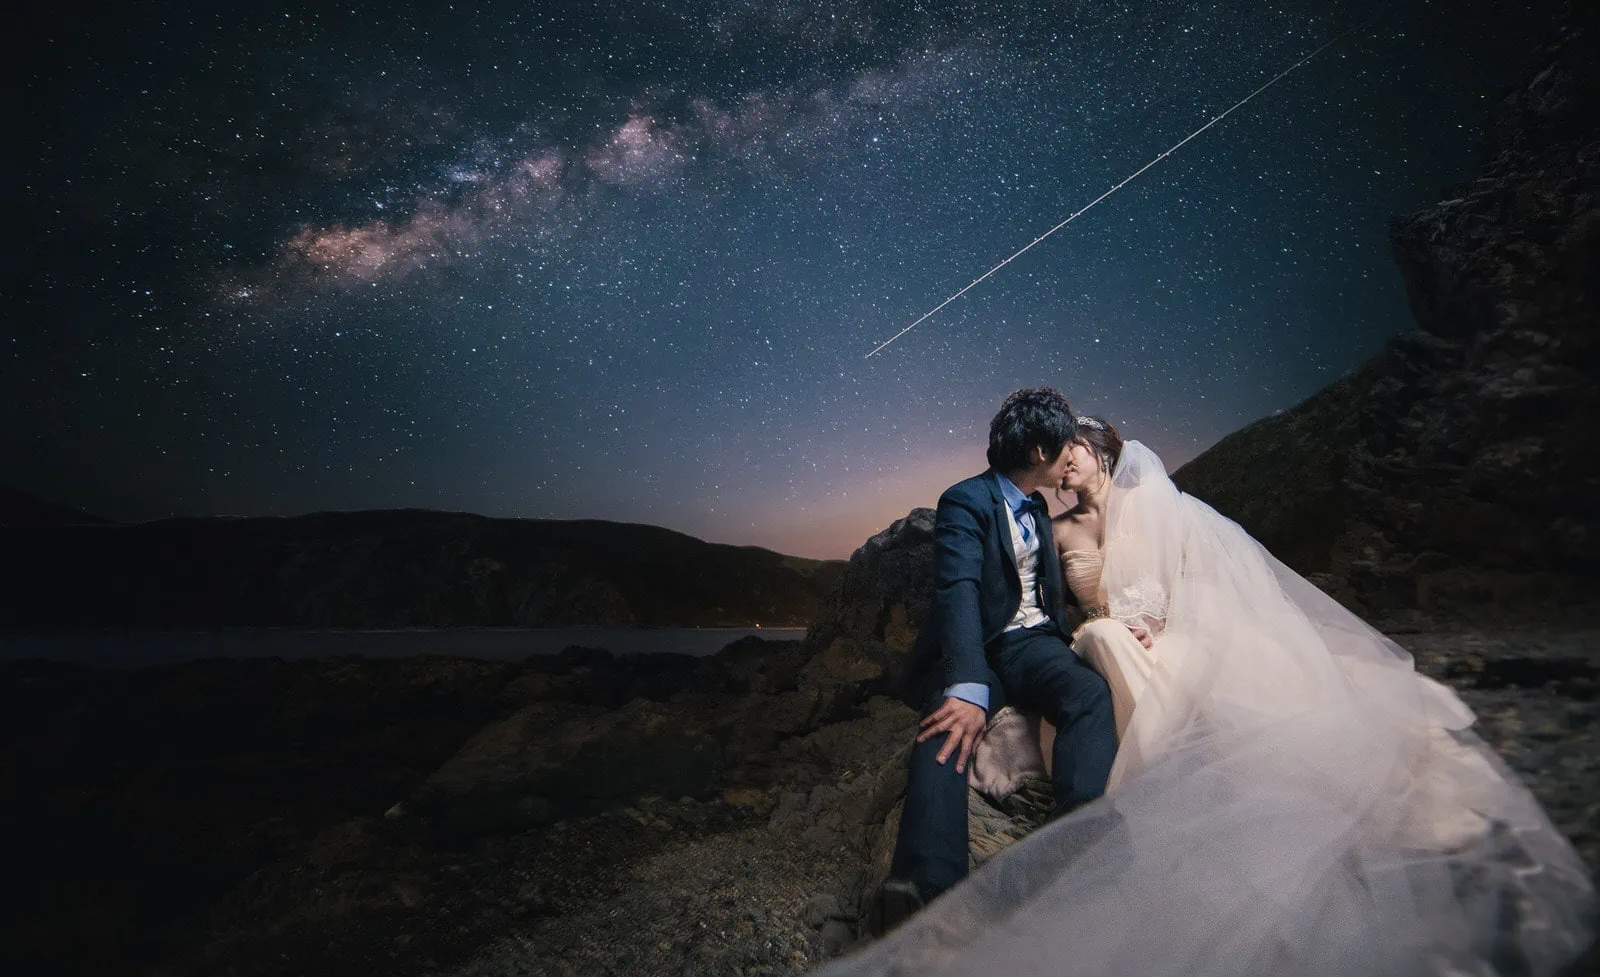 Queenstown New Zealand Elopement Wedding Photographer - A bride and groom captivated by the starry night, sitting on a rock with the milky way in the background, creating an enchanting addition to our Portfolio.